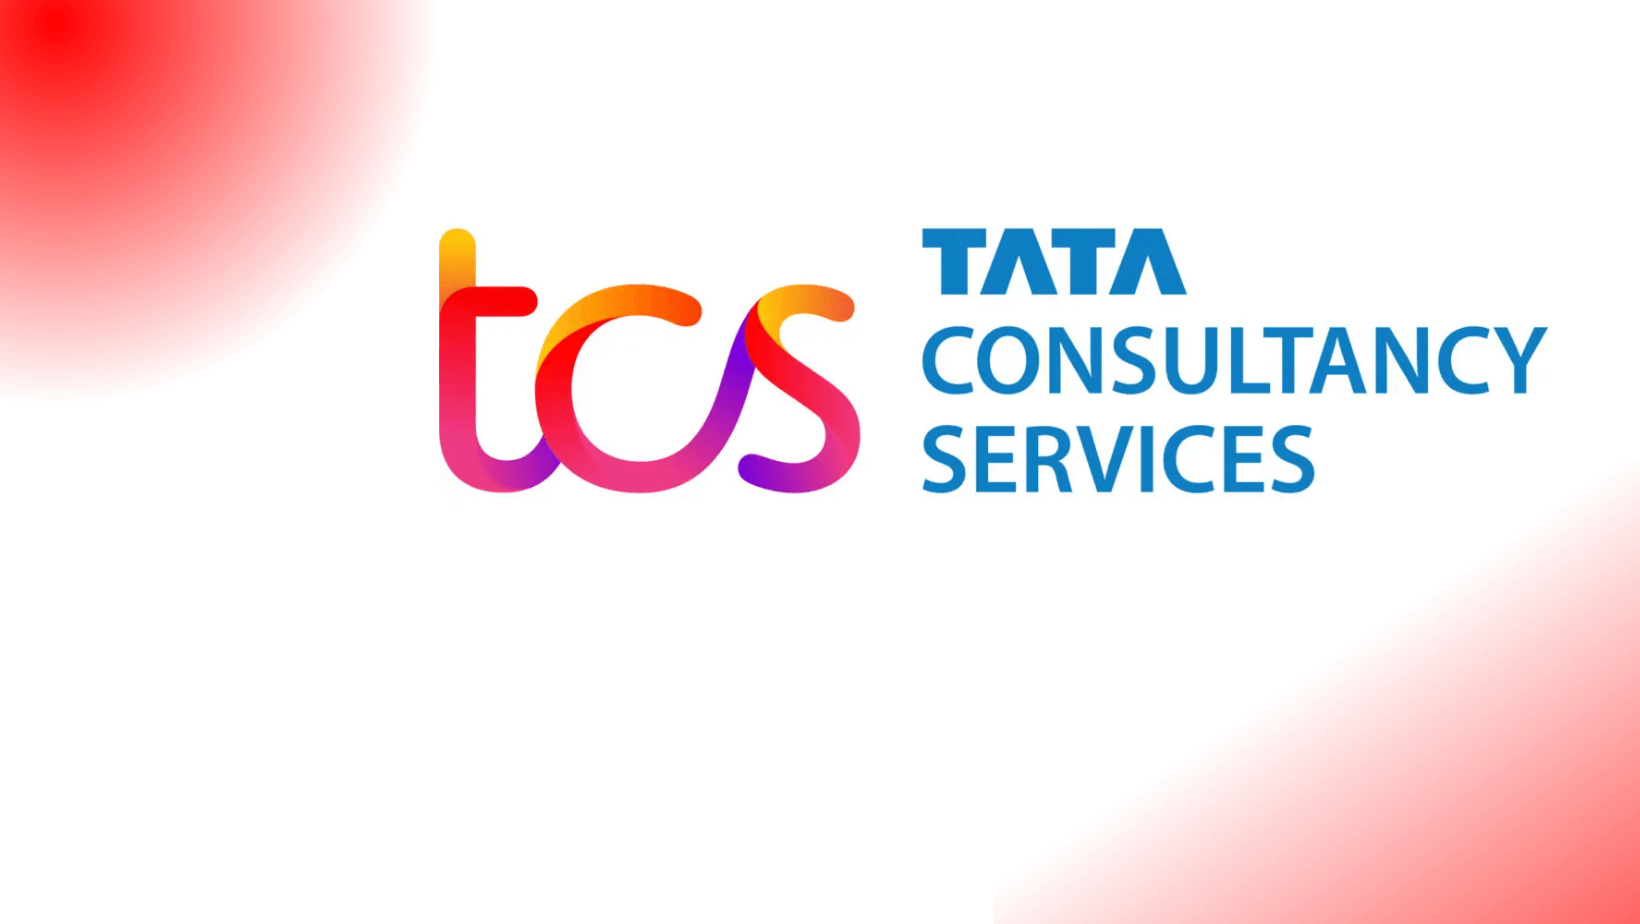 TCS Tops Spanish IT And Cloud Services Provider Customer Satisfaction